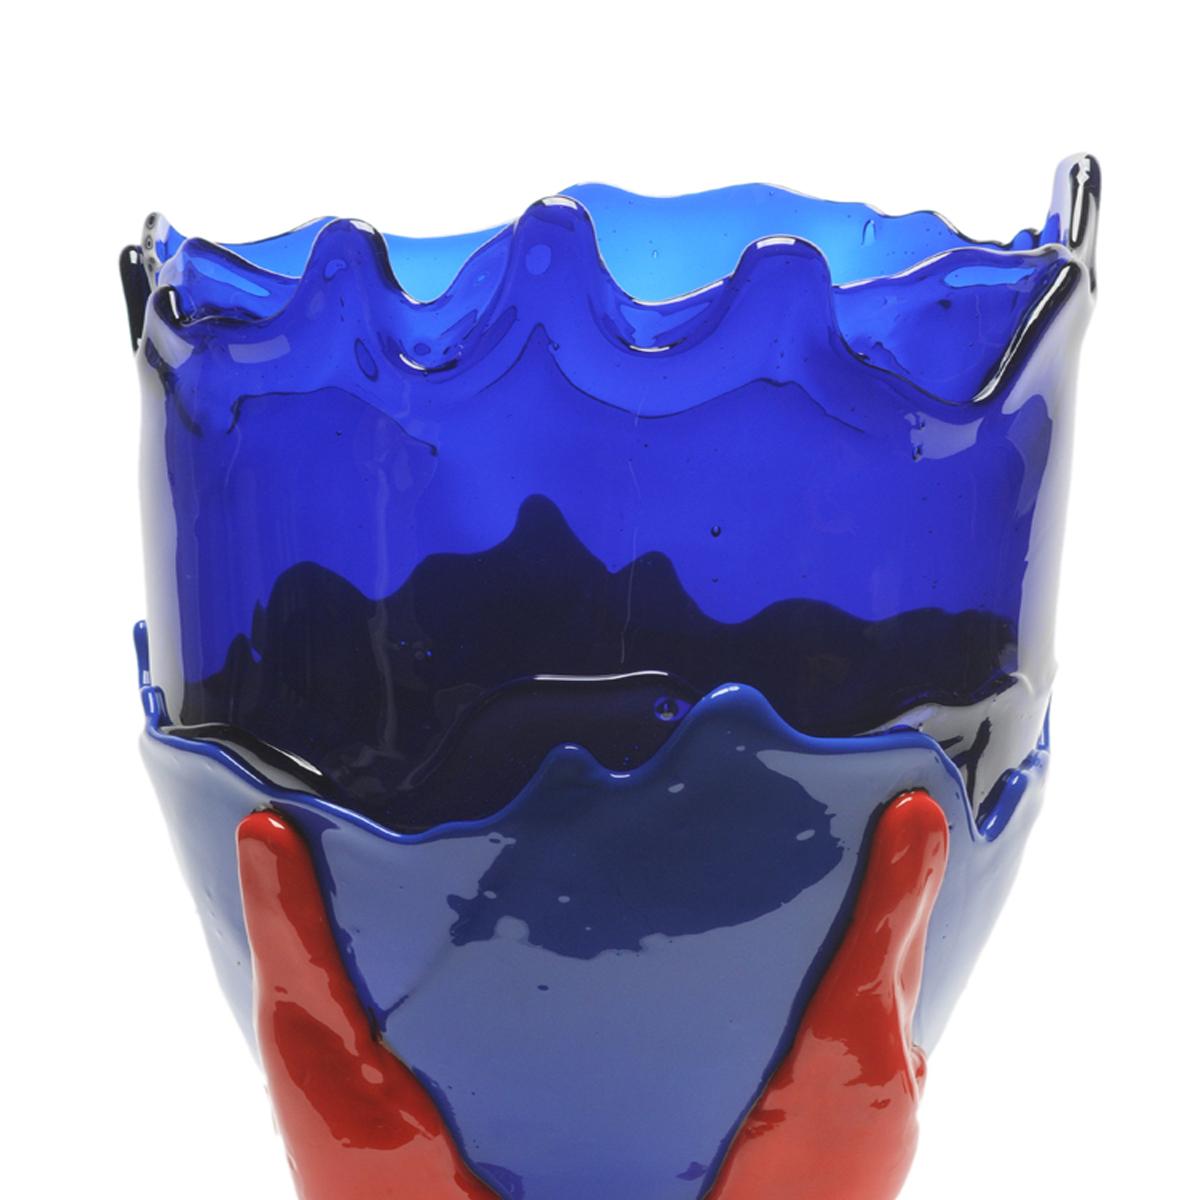 Clear extra colour vase - clear blue Klein, matt blue, matt red.

Vase in soft resin designed by Gaetano Pesce in 1995 for Fish Design collection.

Measures: L- Ø 22cm x H 36cm

Other sizes available.
Vase in soft resin designed by Gaetano Pesce in